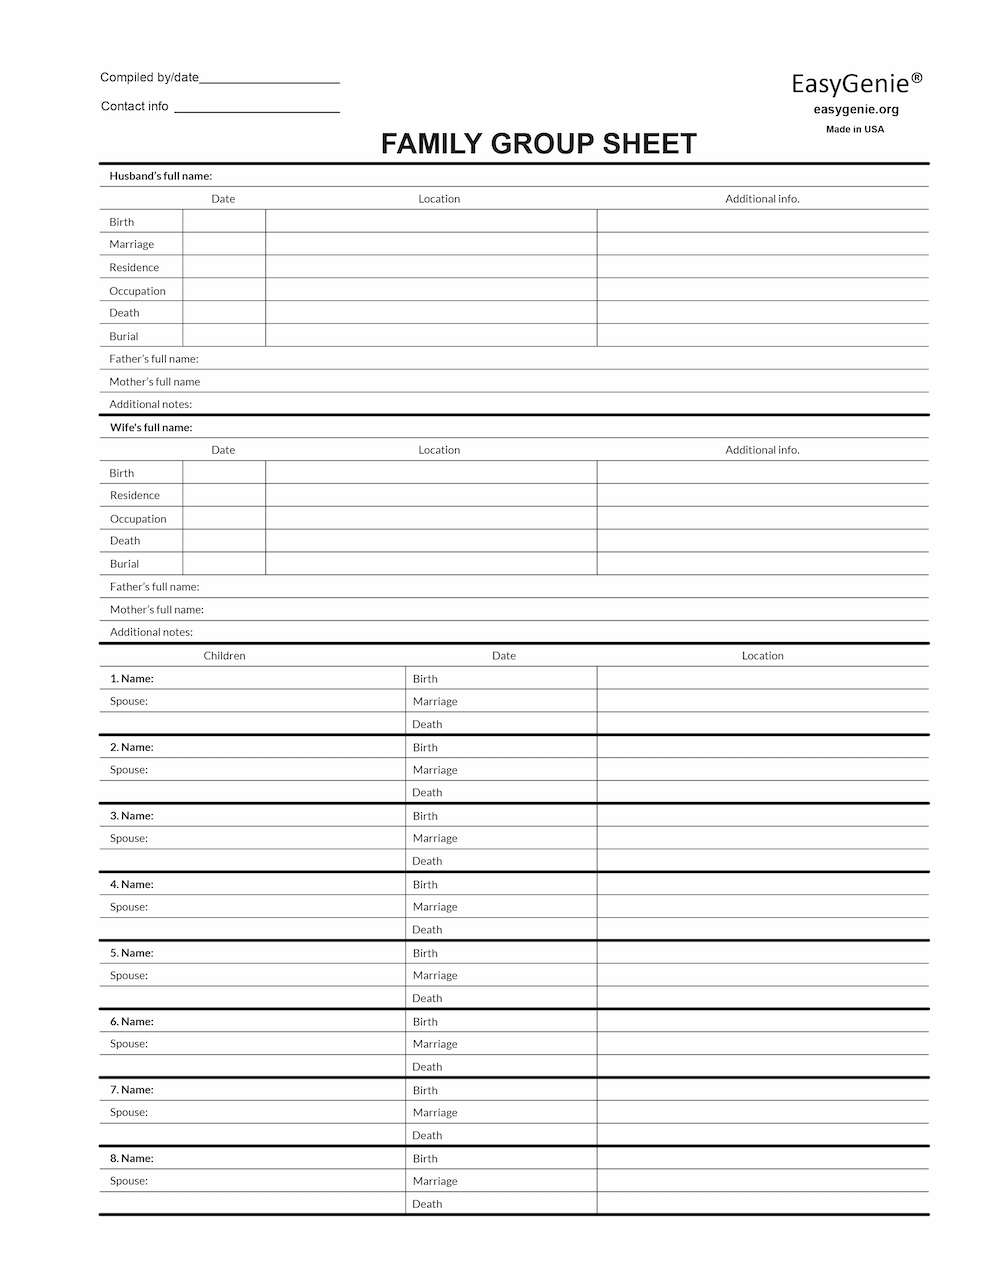 EasyGenie Blank Two-Sided Family Group Sheets for Genealogy (40 sheets)